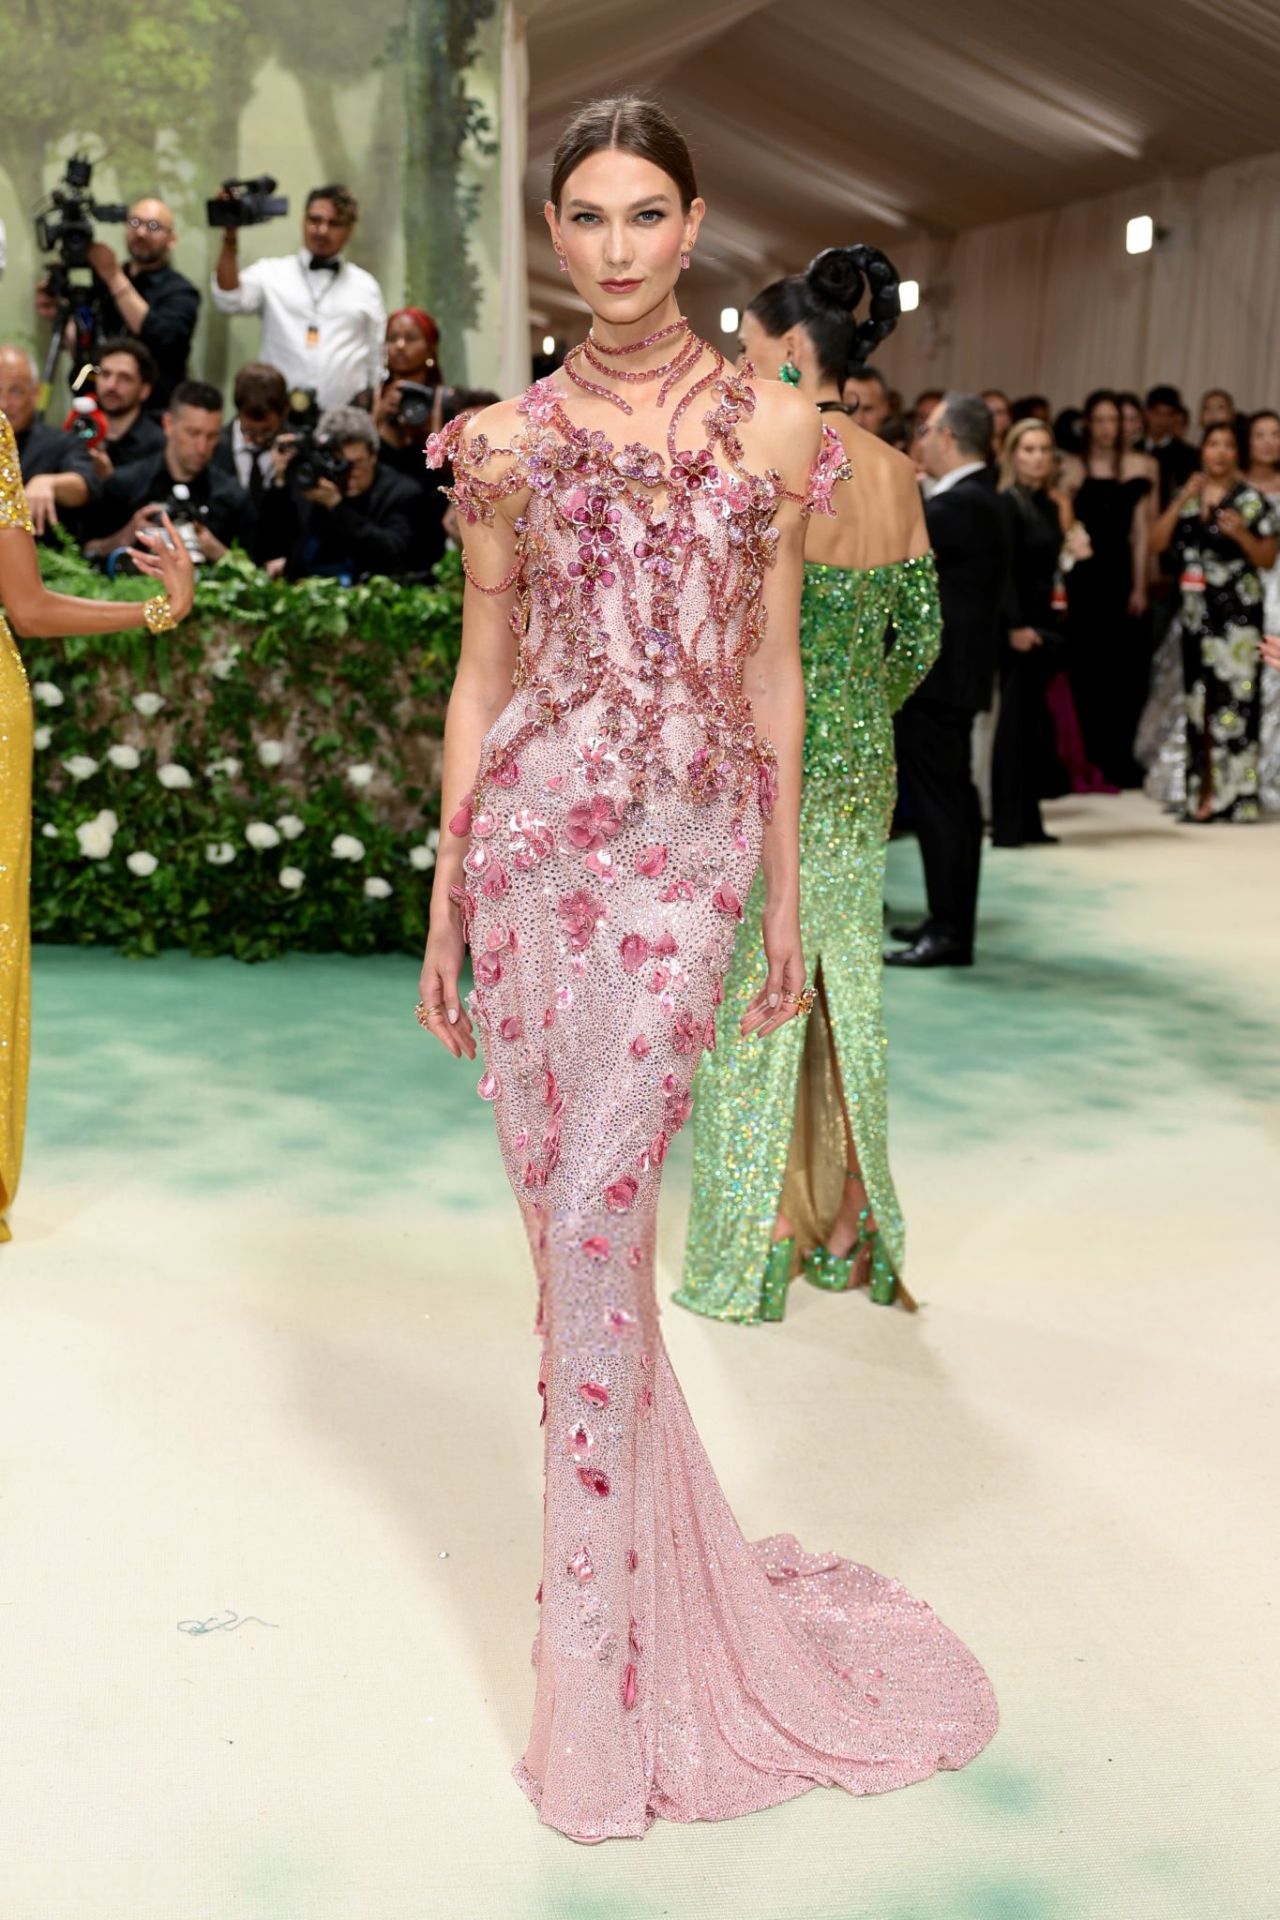 KARLIE KLOSS IN PINK BEJEWELED GOWN AT THE 2024 MET GALA IN NEW YORK